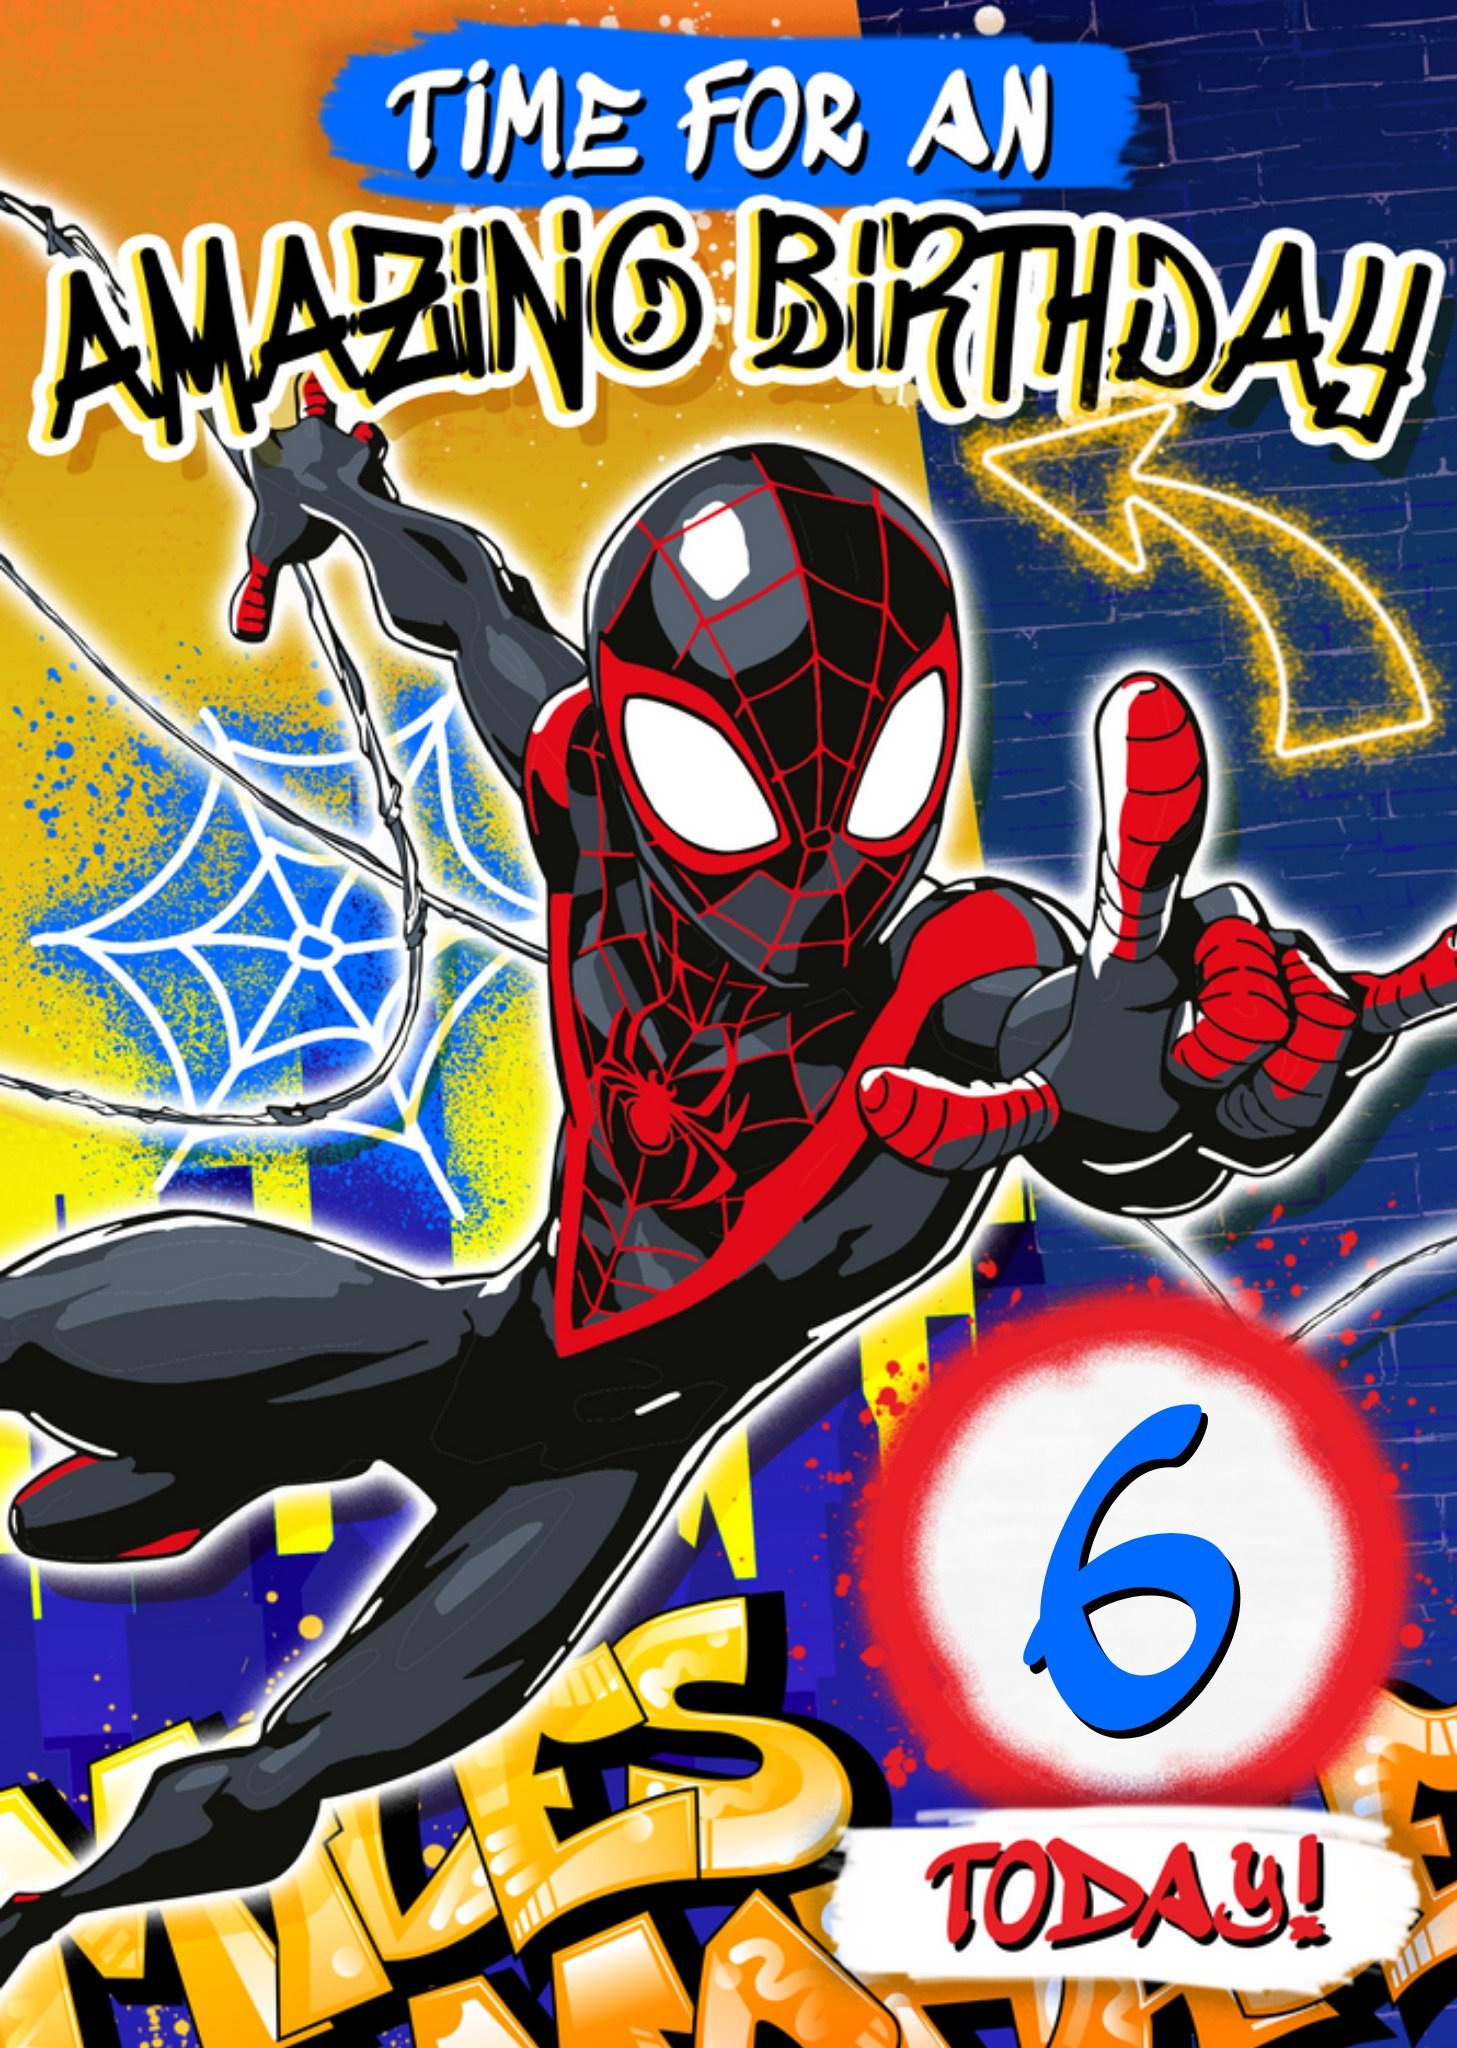 Disney Marvel Spiderman Mile Morales Time For An Amazing Birthday 6 Today Birthday Card, Large